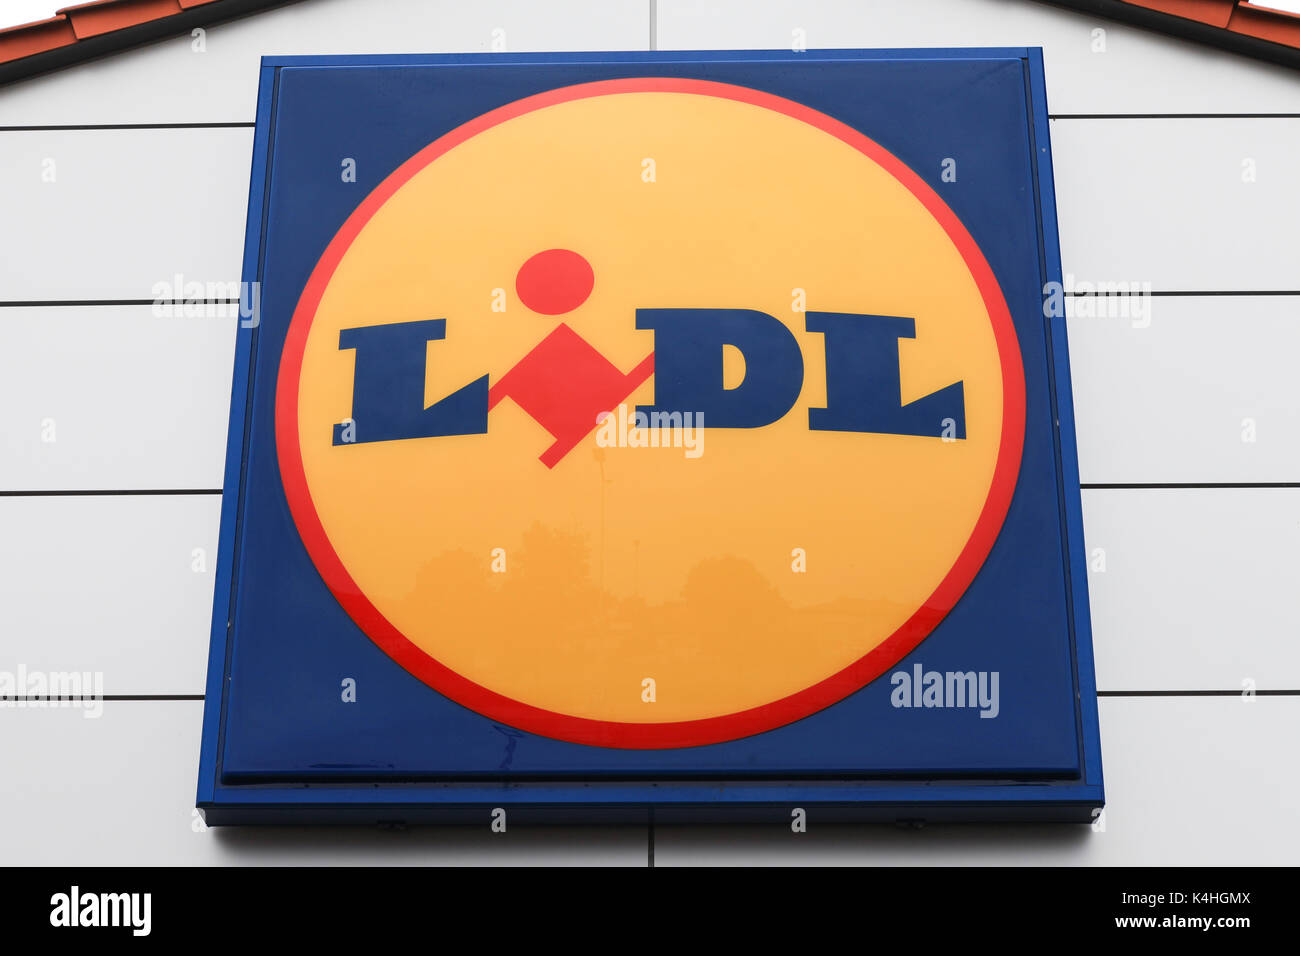 Lidl sign. Lidl Stiftung & Co. is a German global discount supermarket chain, based in Neckarsulm, Germany Stock Photo